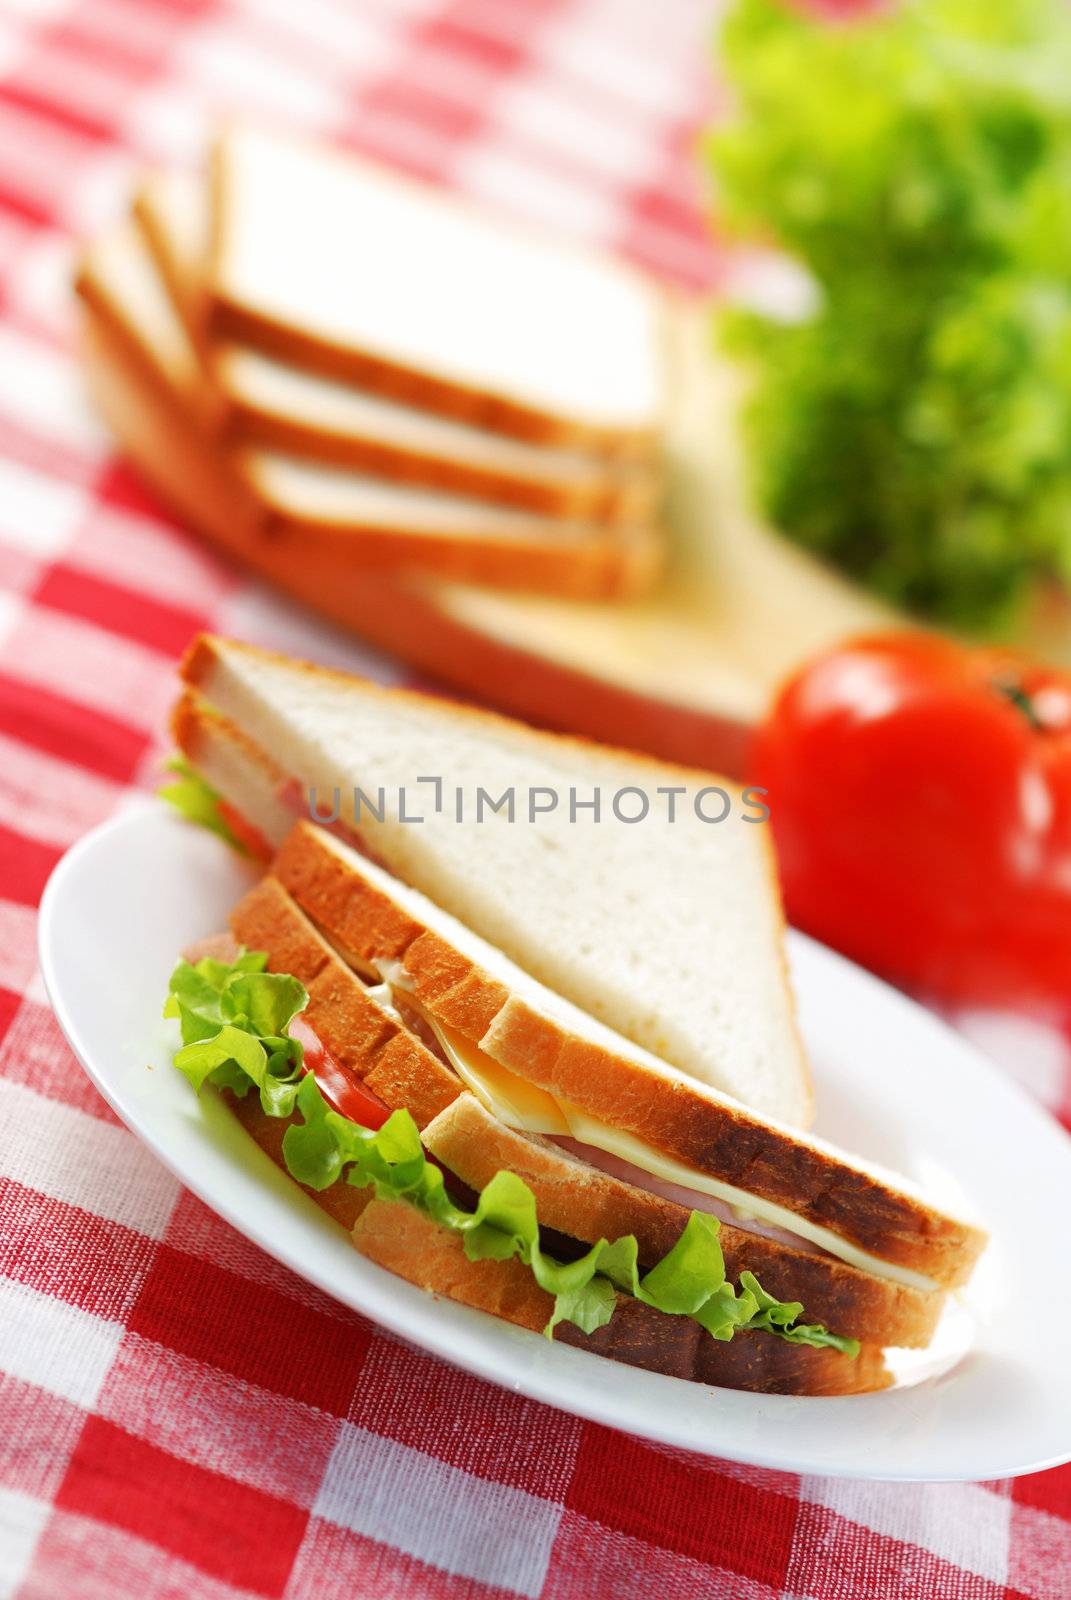 Sandwich with ingredients by haveseen